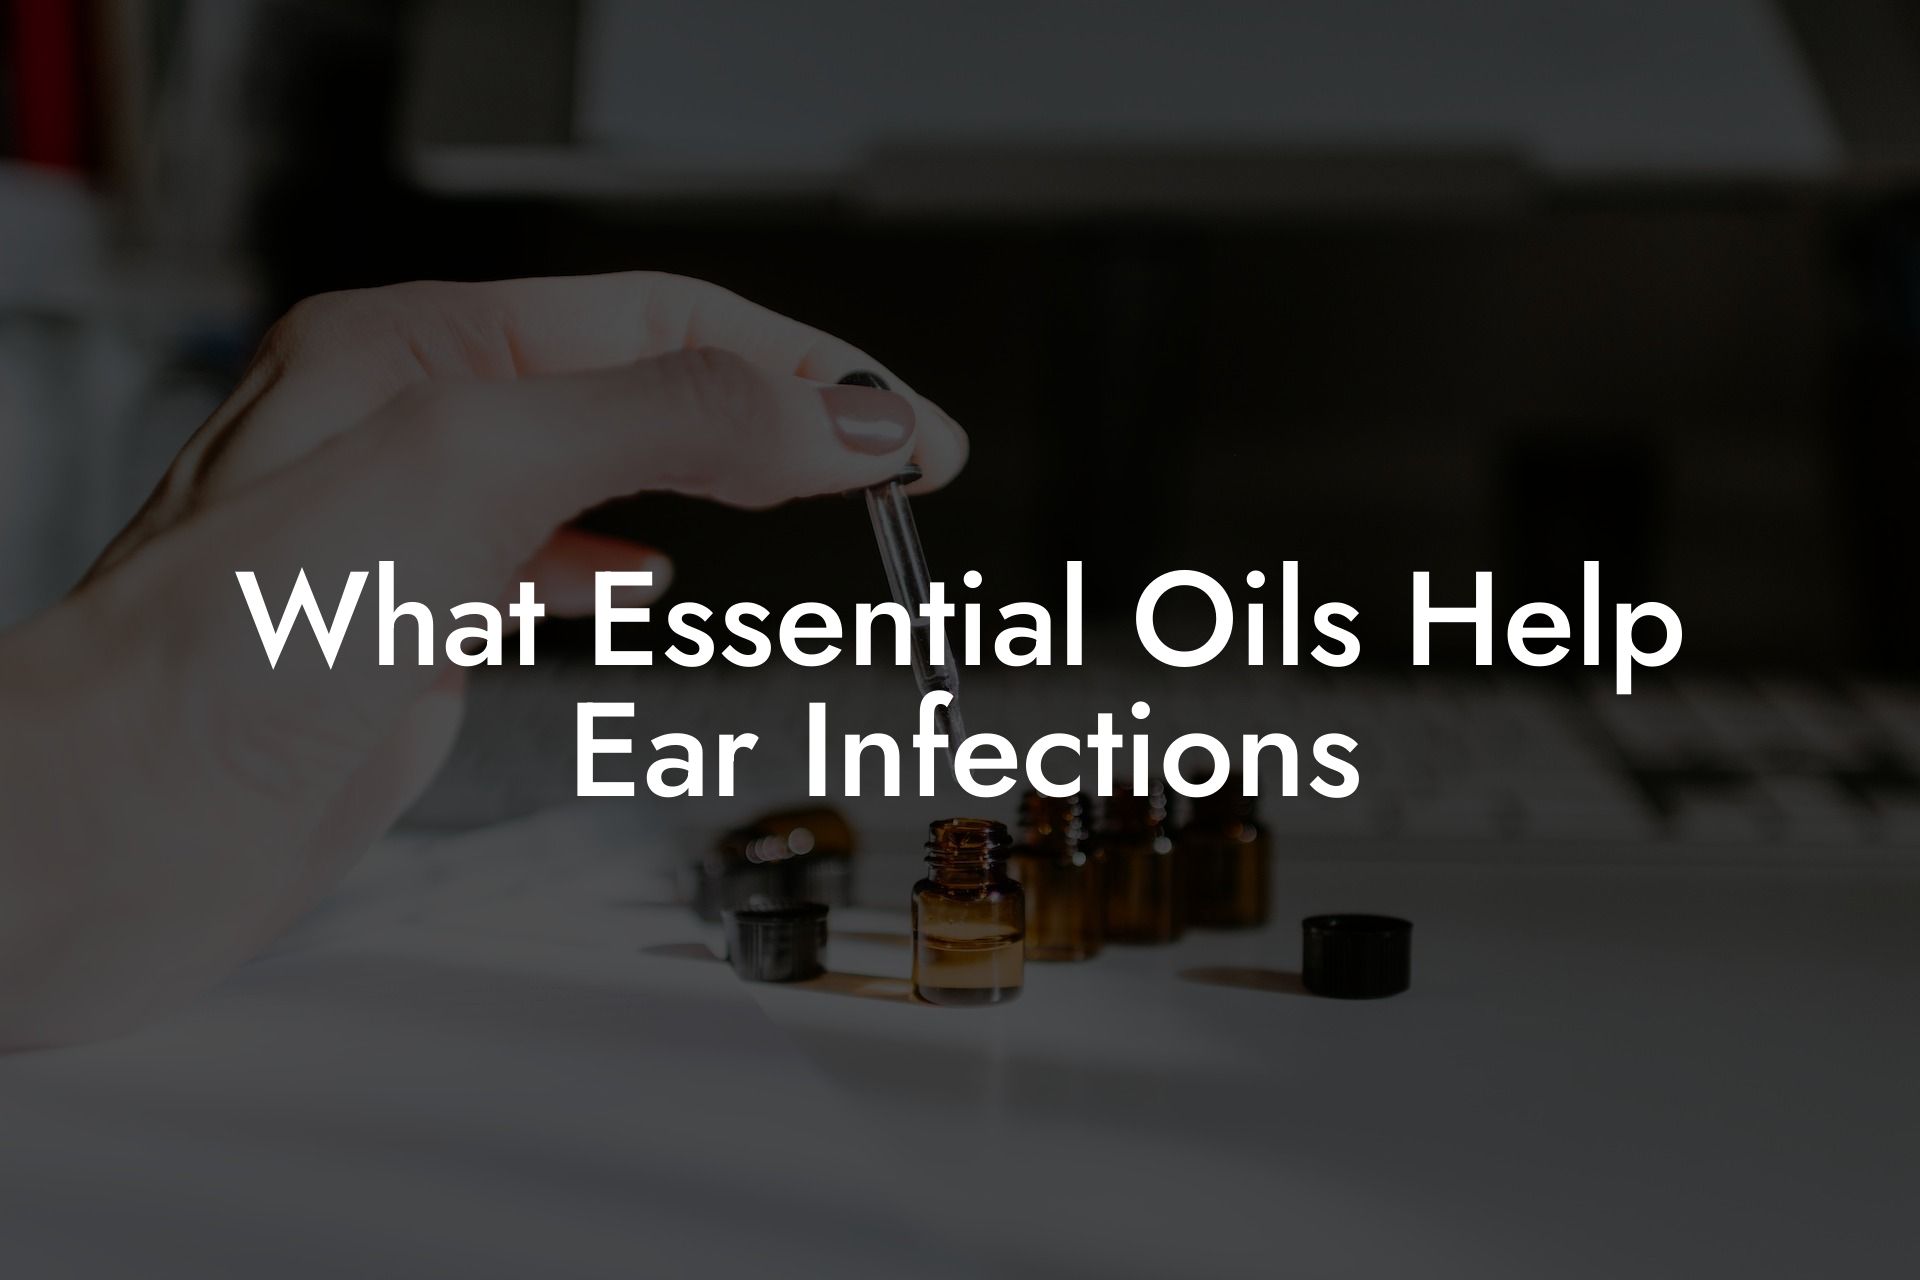 What Essential Oils Help Ear Infections